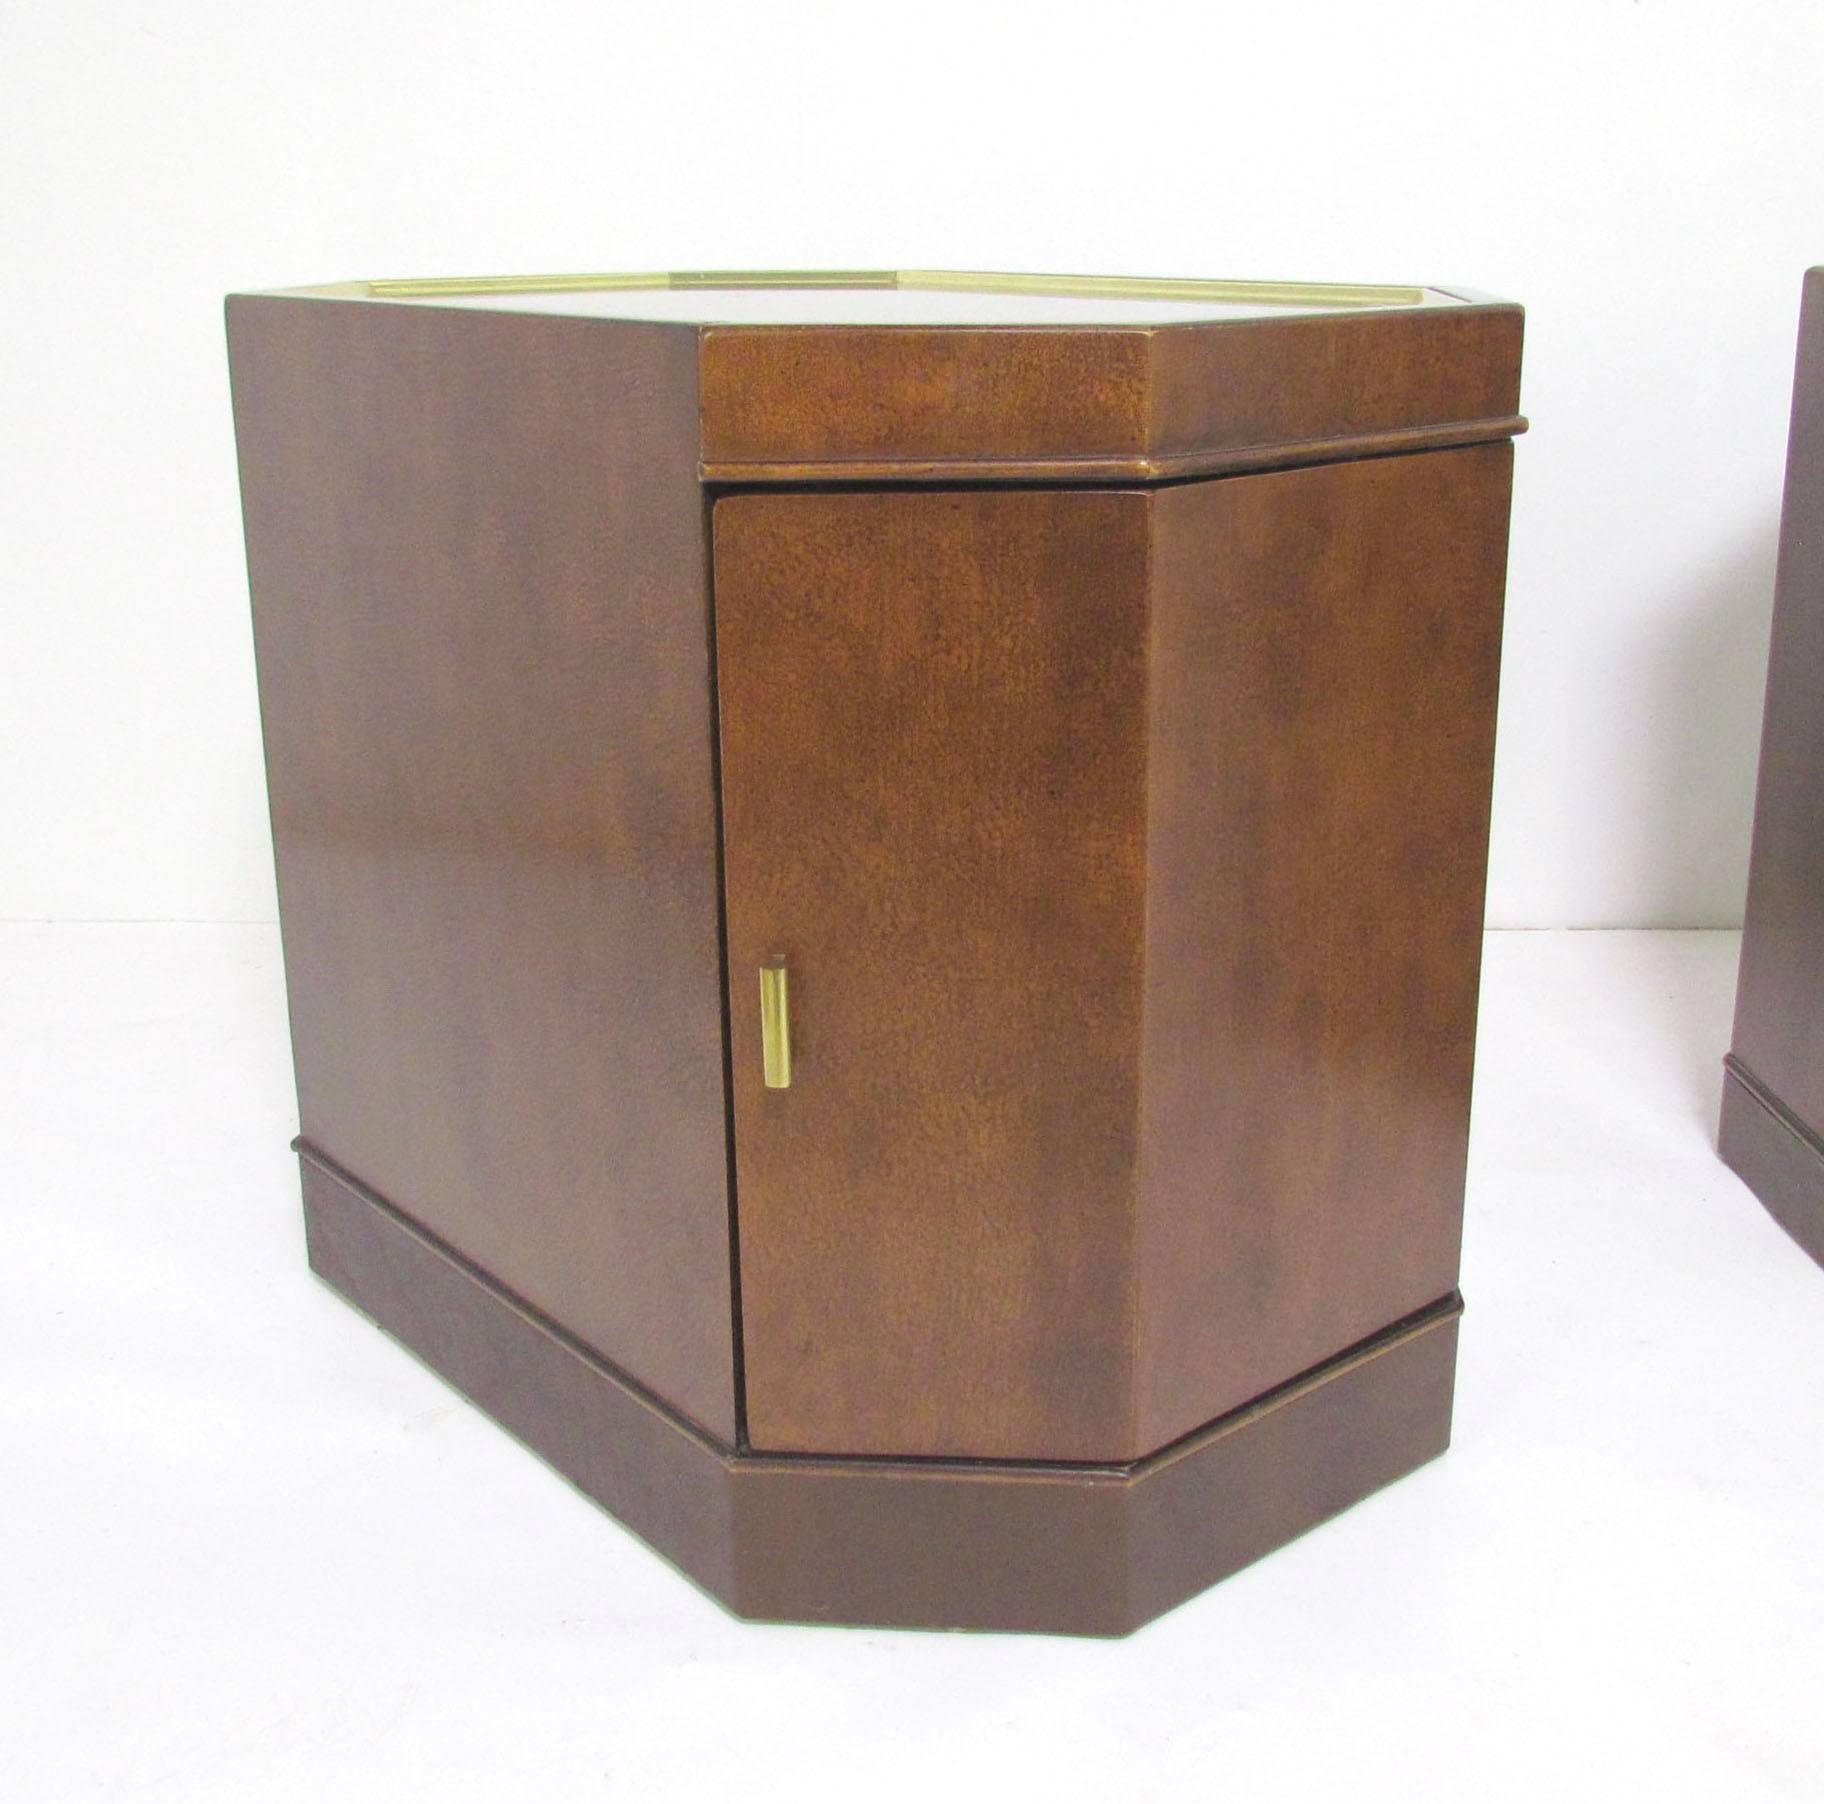 American Pair of Mid-Century Octagonal End Tables or Nightstands in Manner of Probber